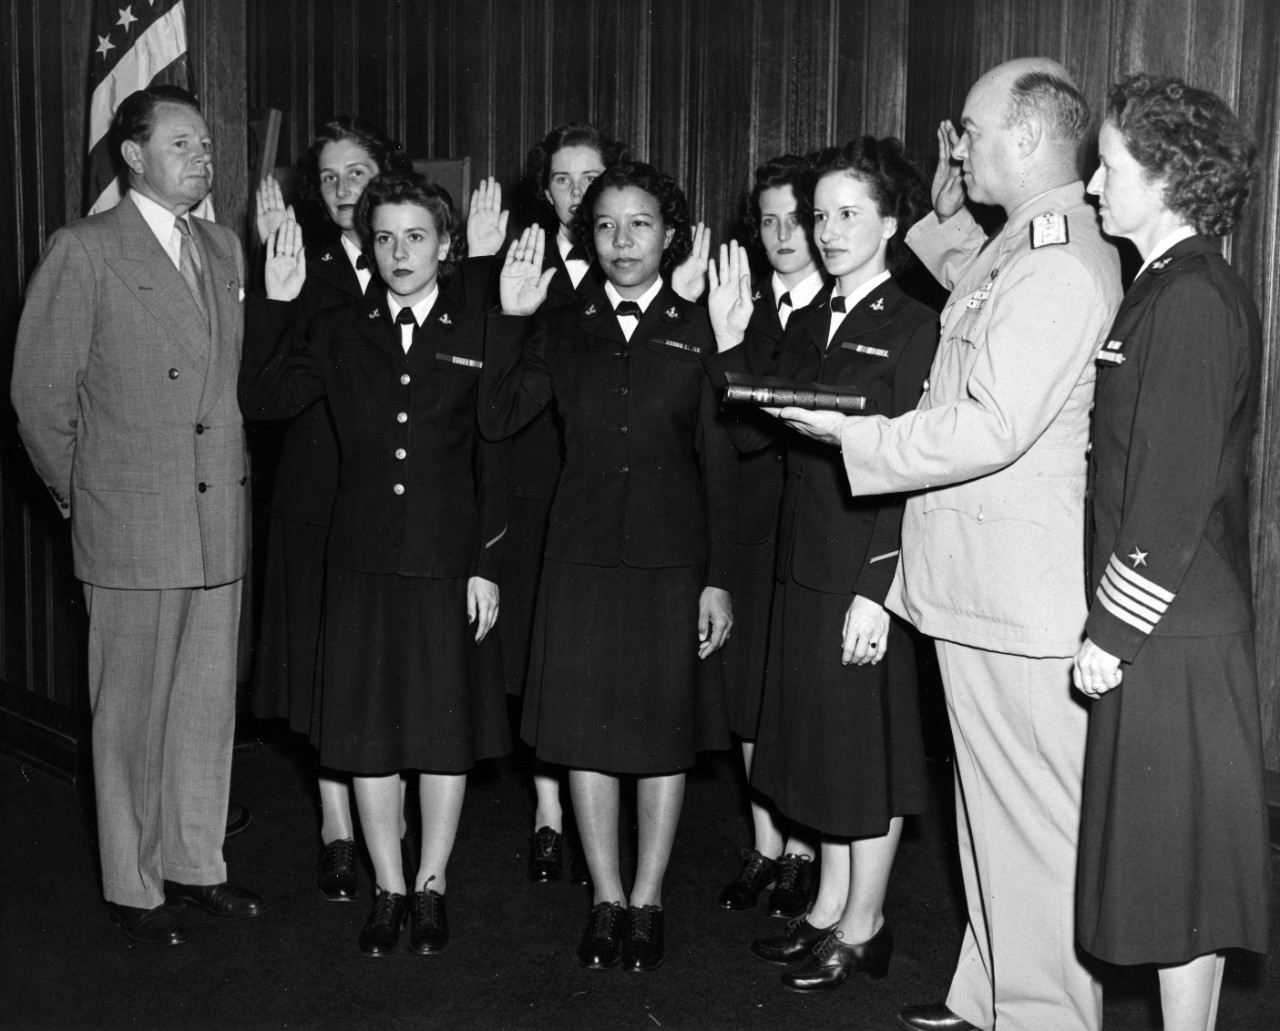 A photograph of a group of women in uniform standing together; in the foreground are a man in uniform and another woman in uniform turned to face the women.